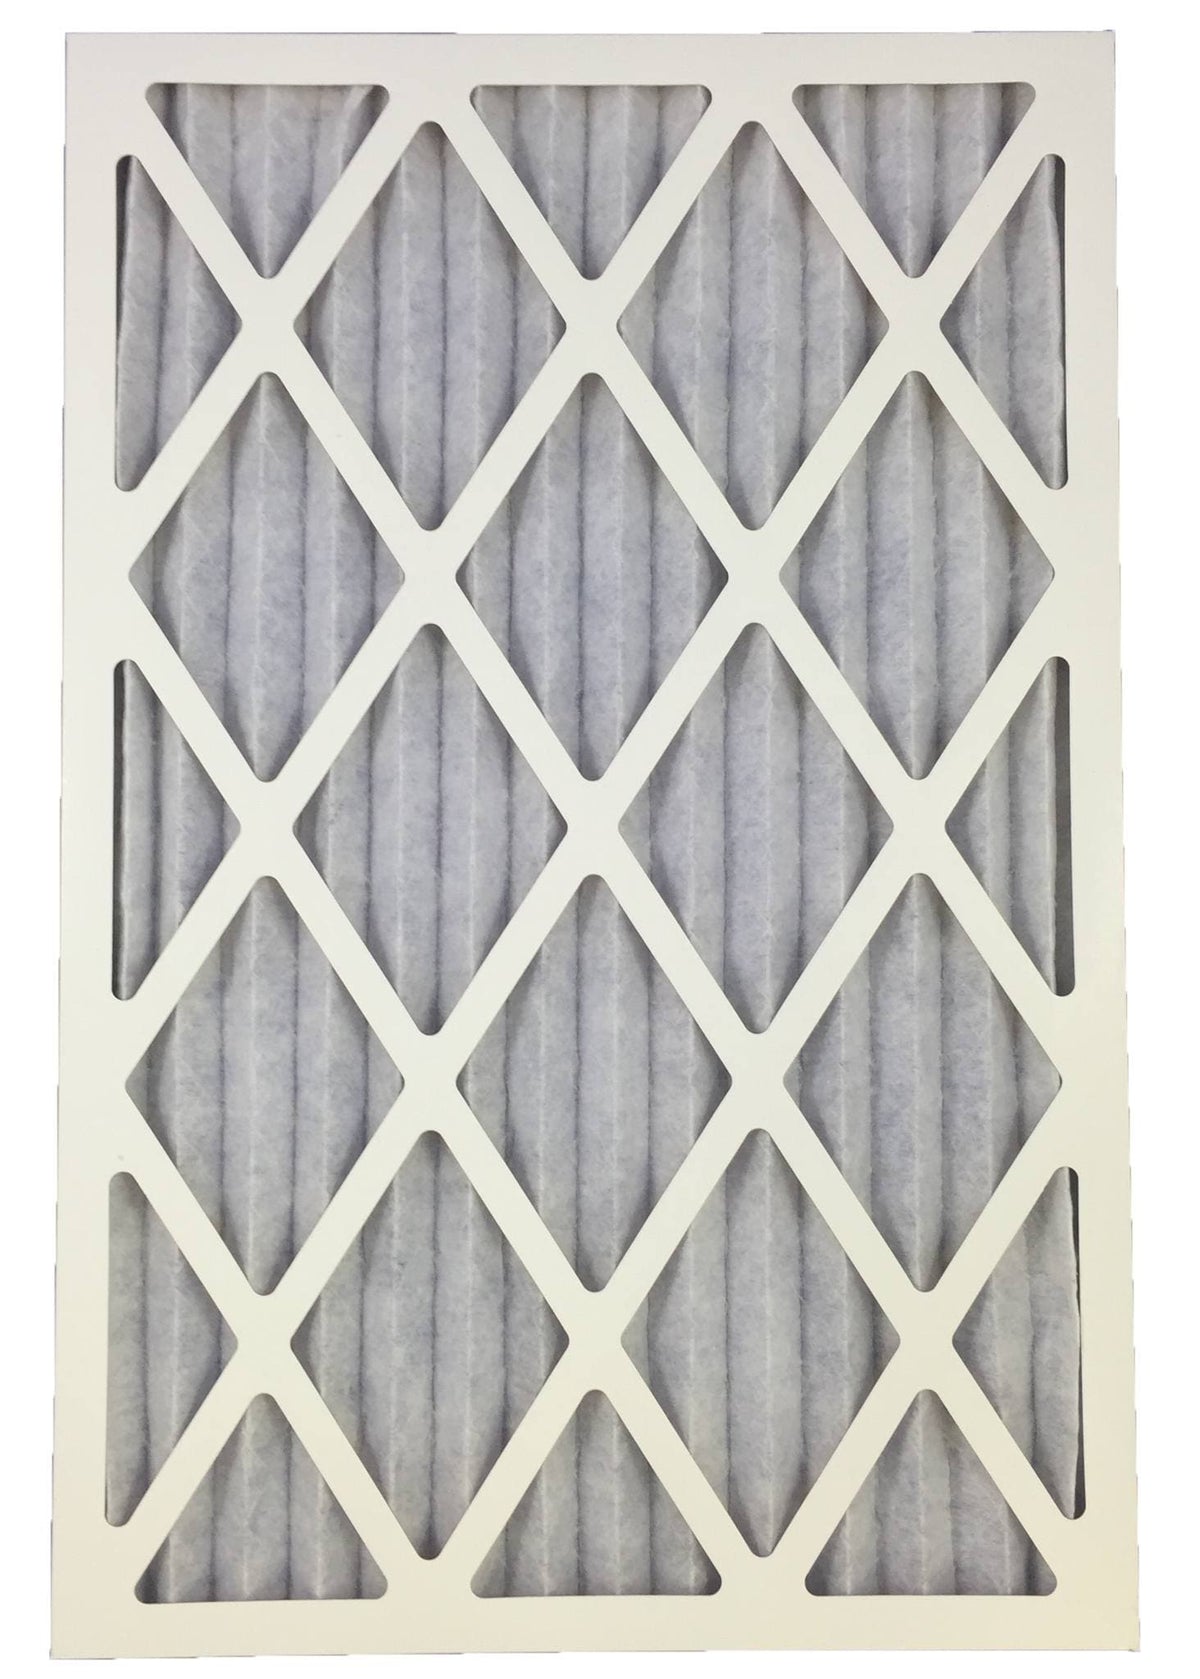 16x24x1 Merv 8 Pleated Air Filter - Case of 6